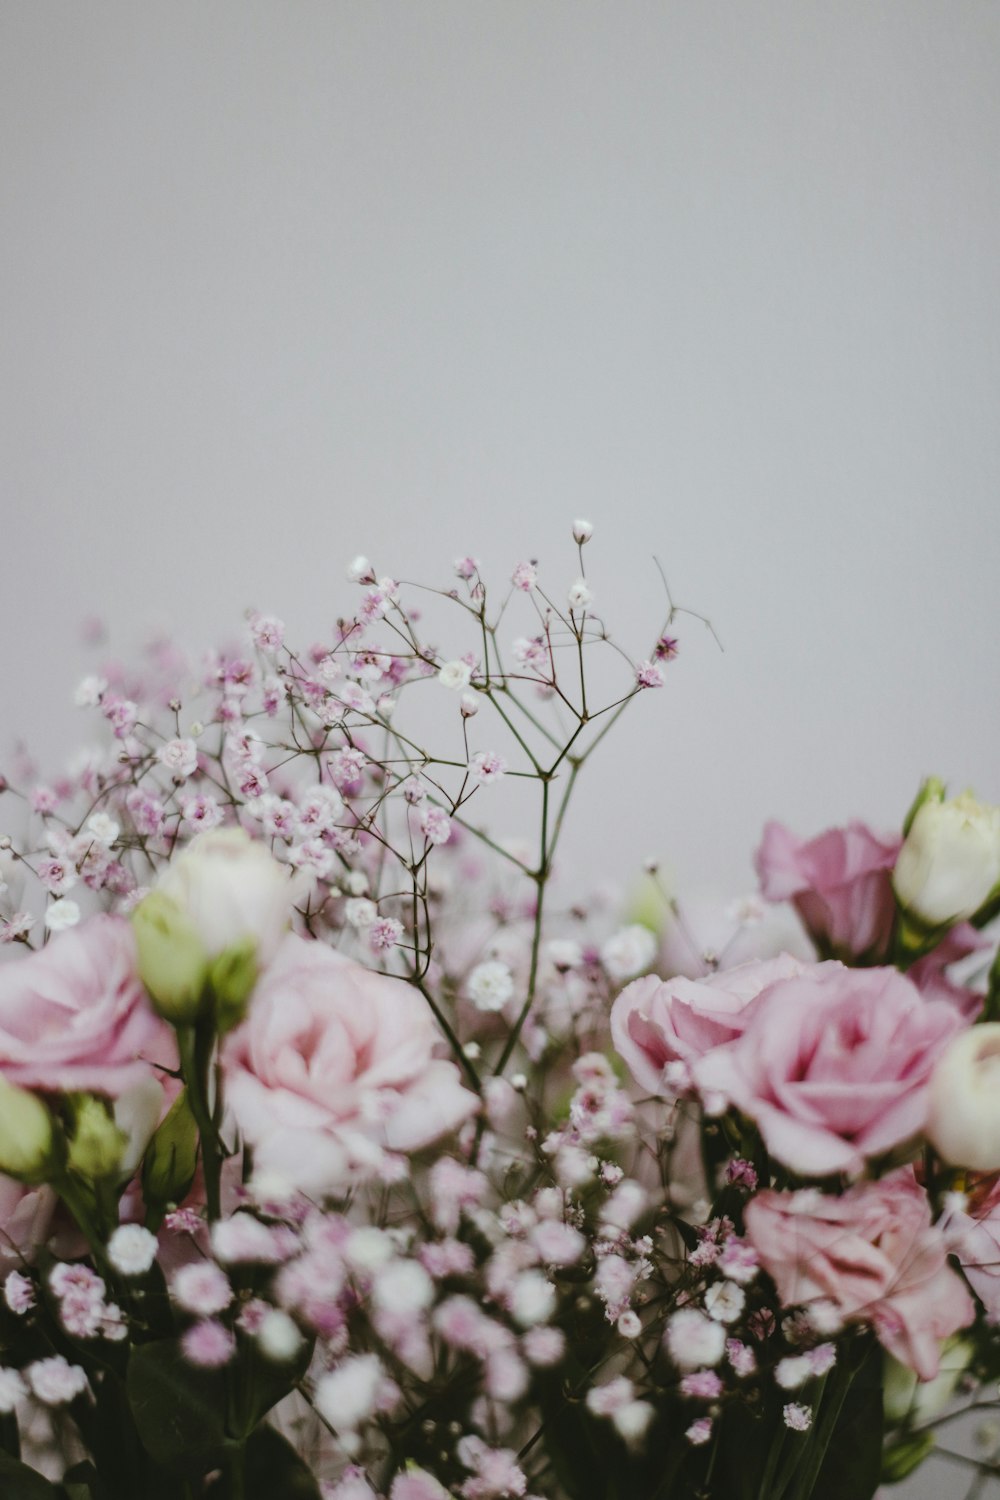 Delicate white and pink flowers heaped together · Free Stock Photo